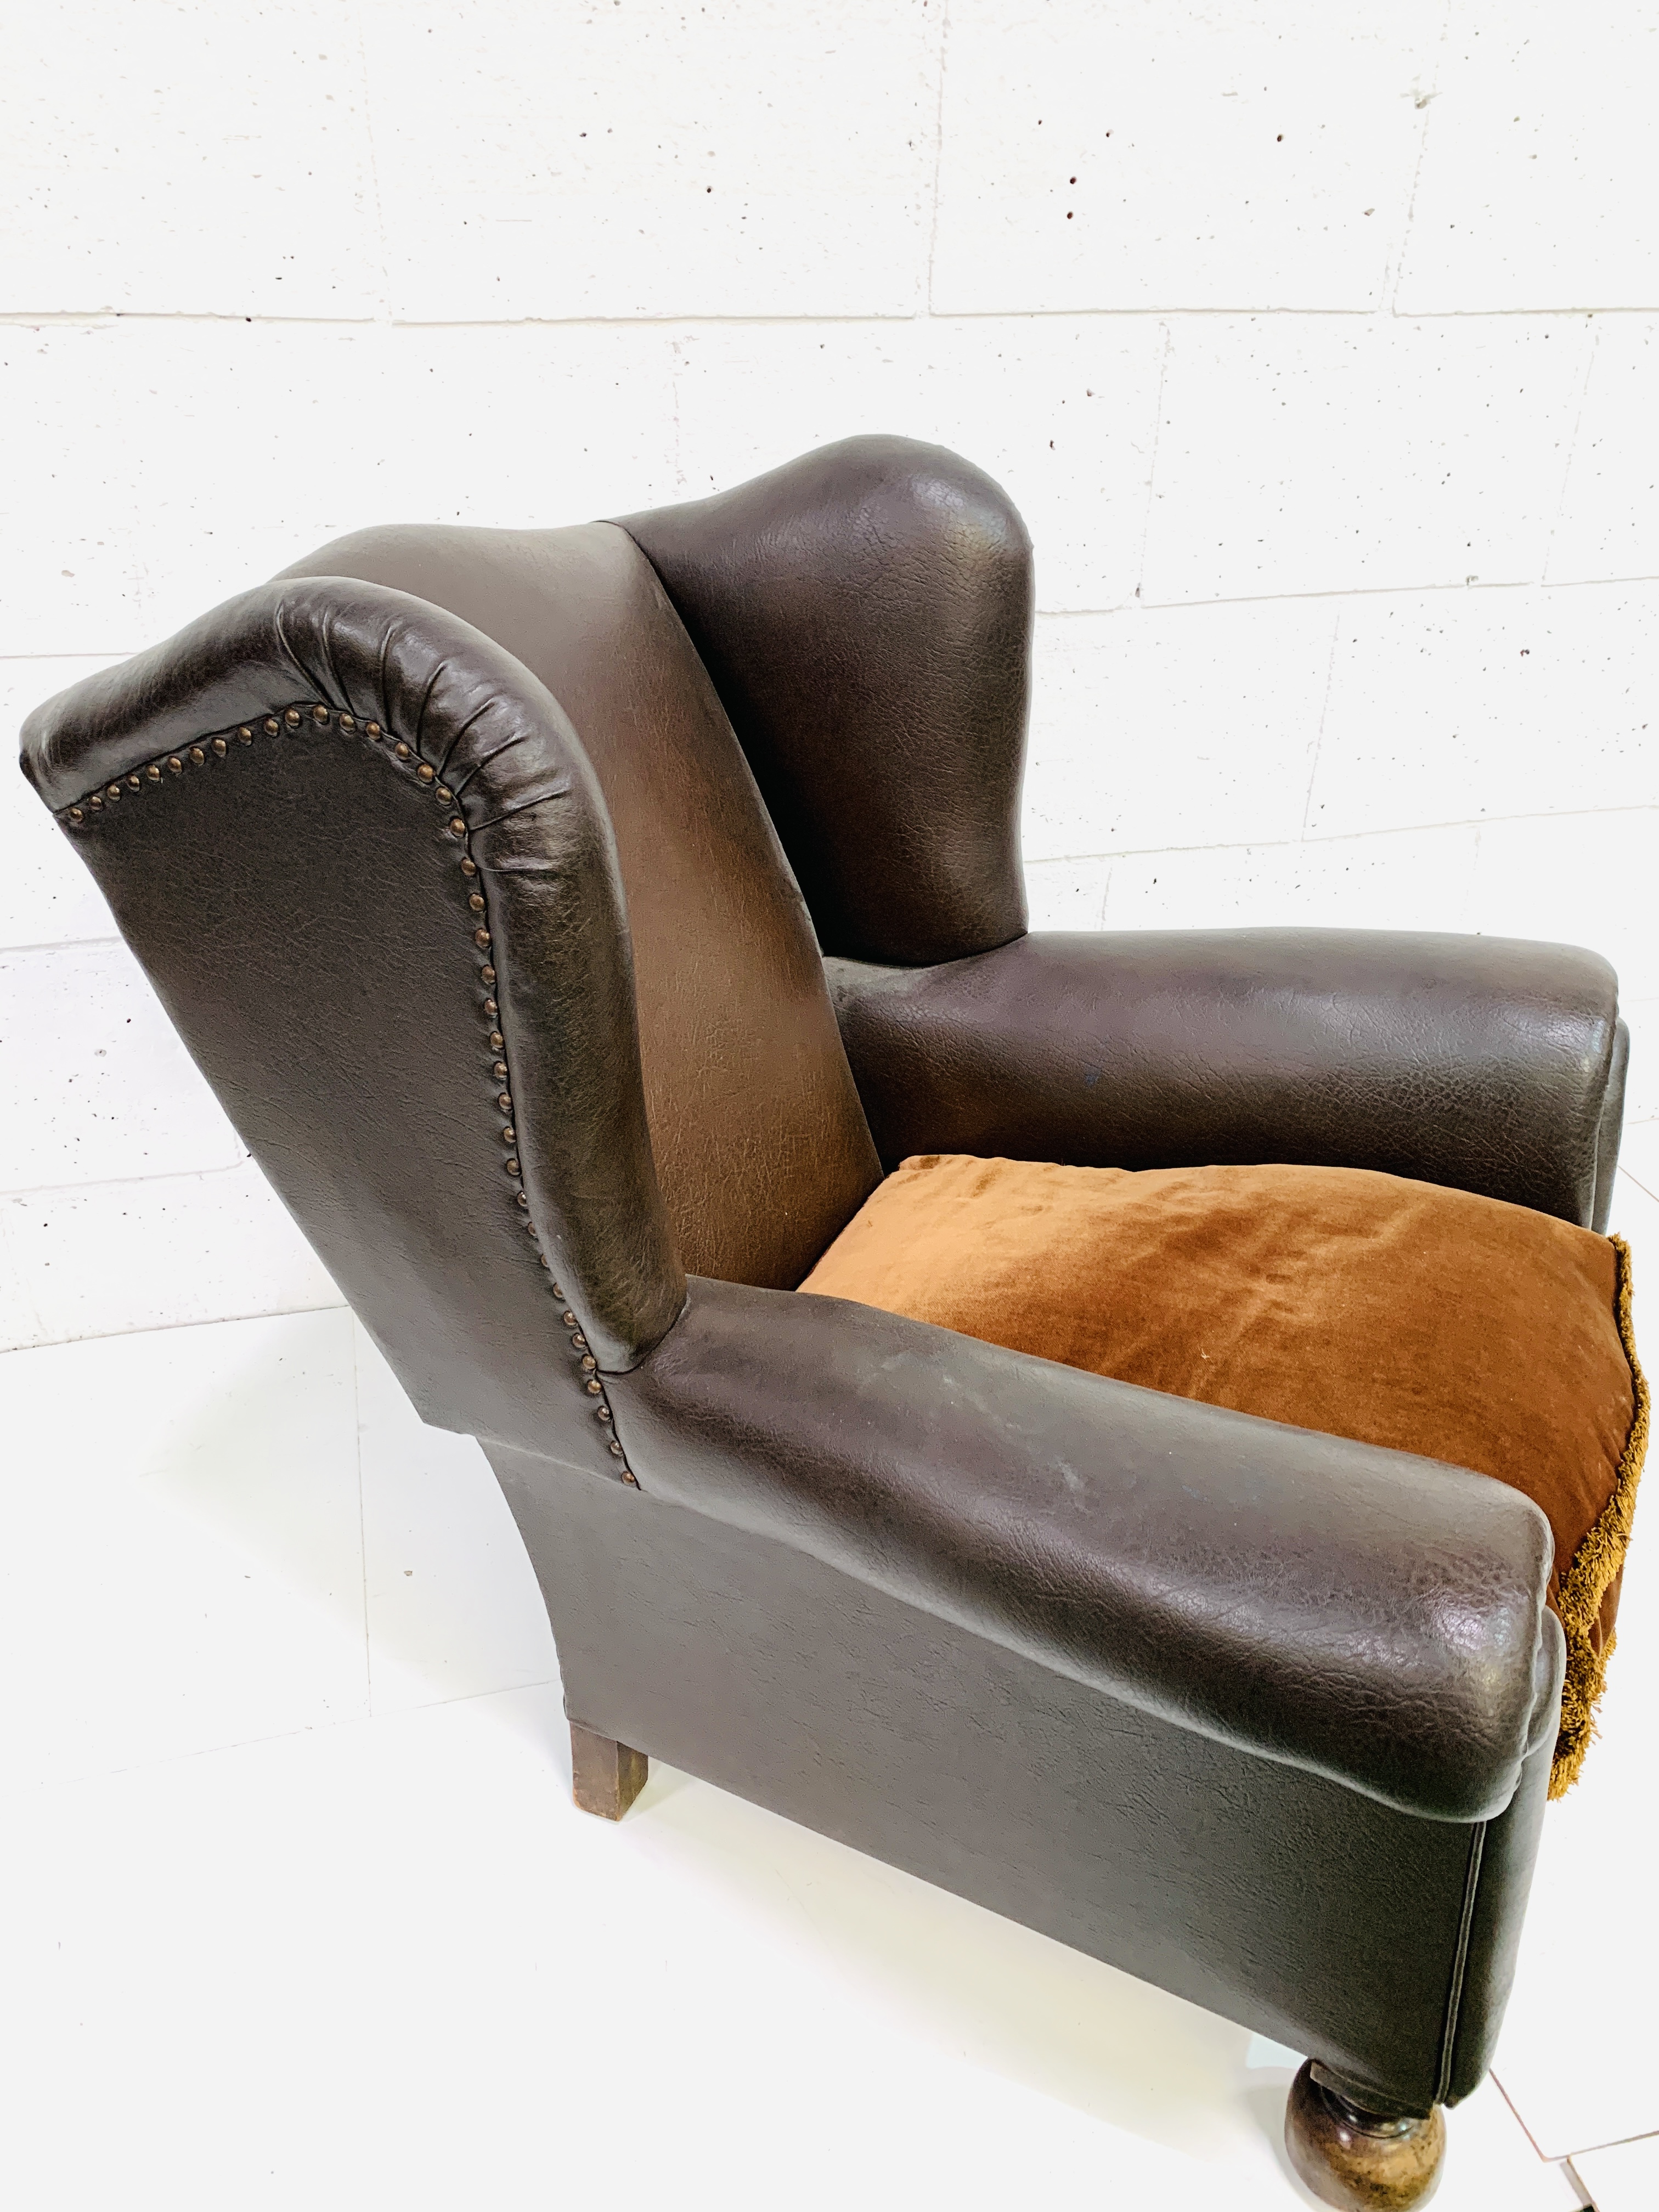 Dark brown leather deep wing back armchair - Image 4 of 5